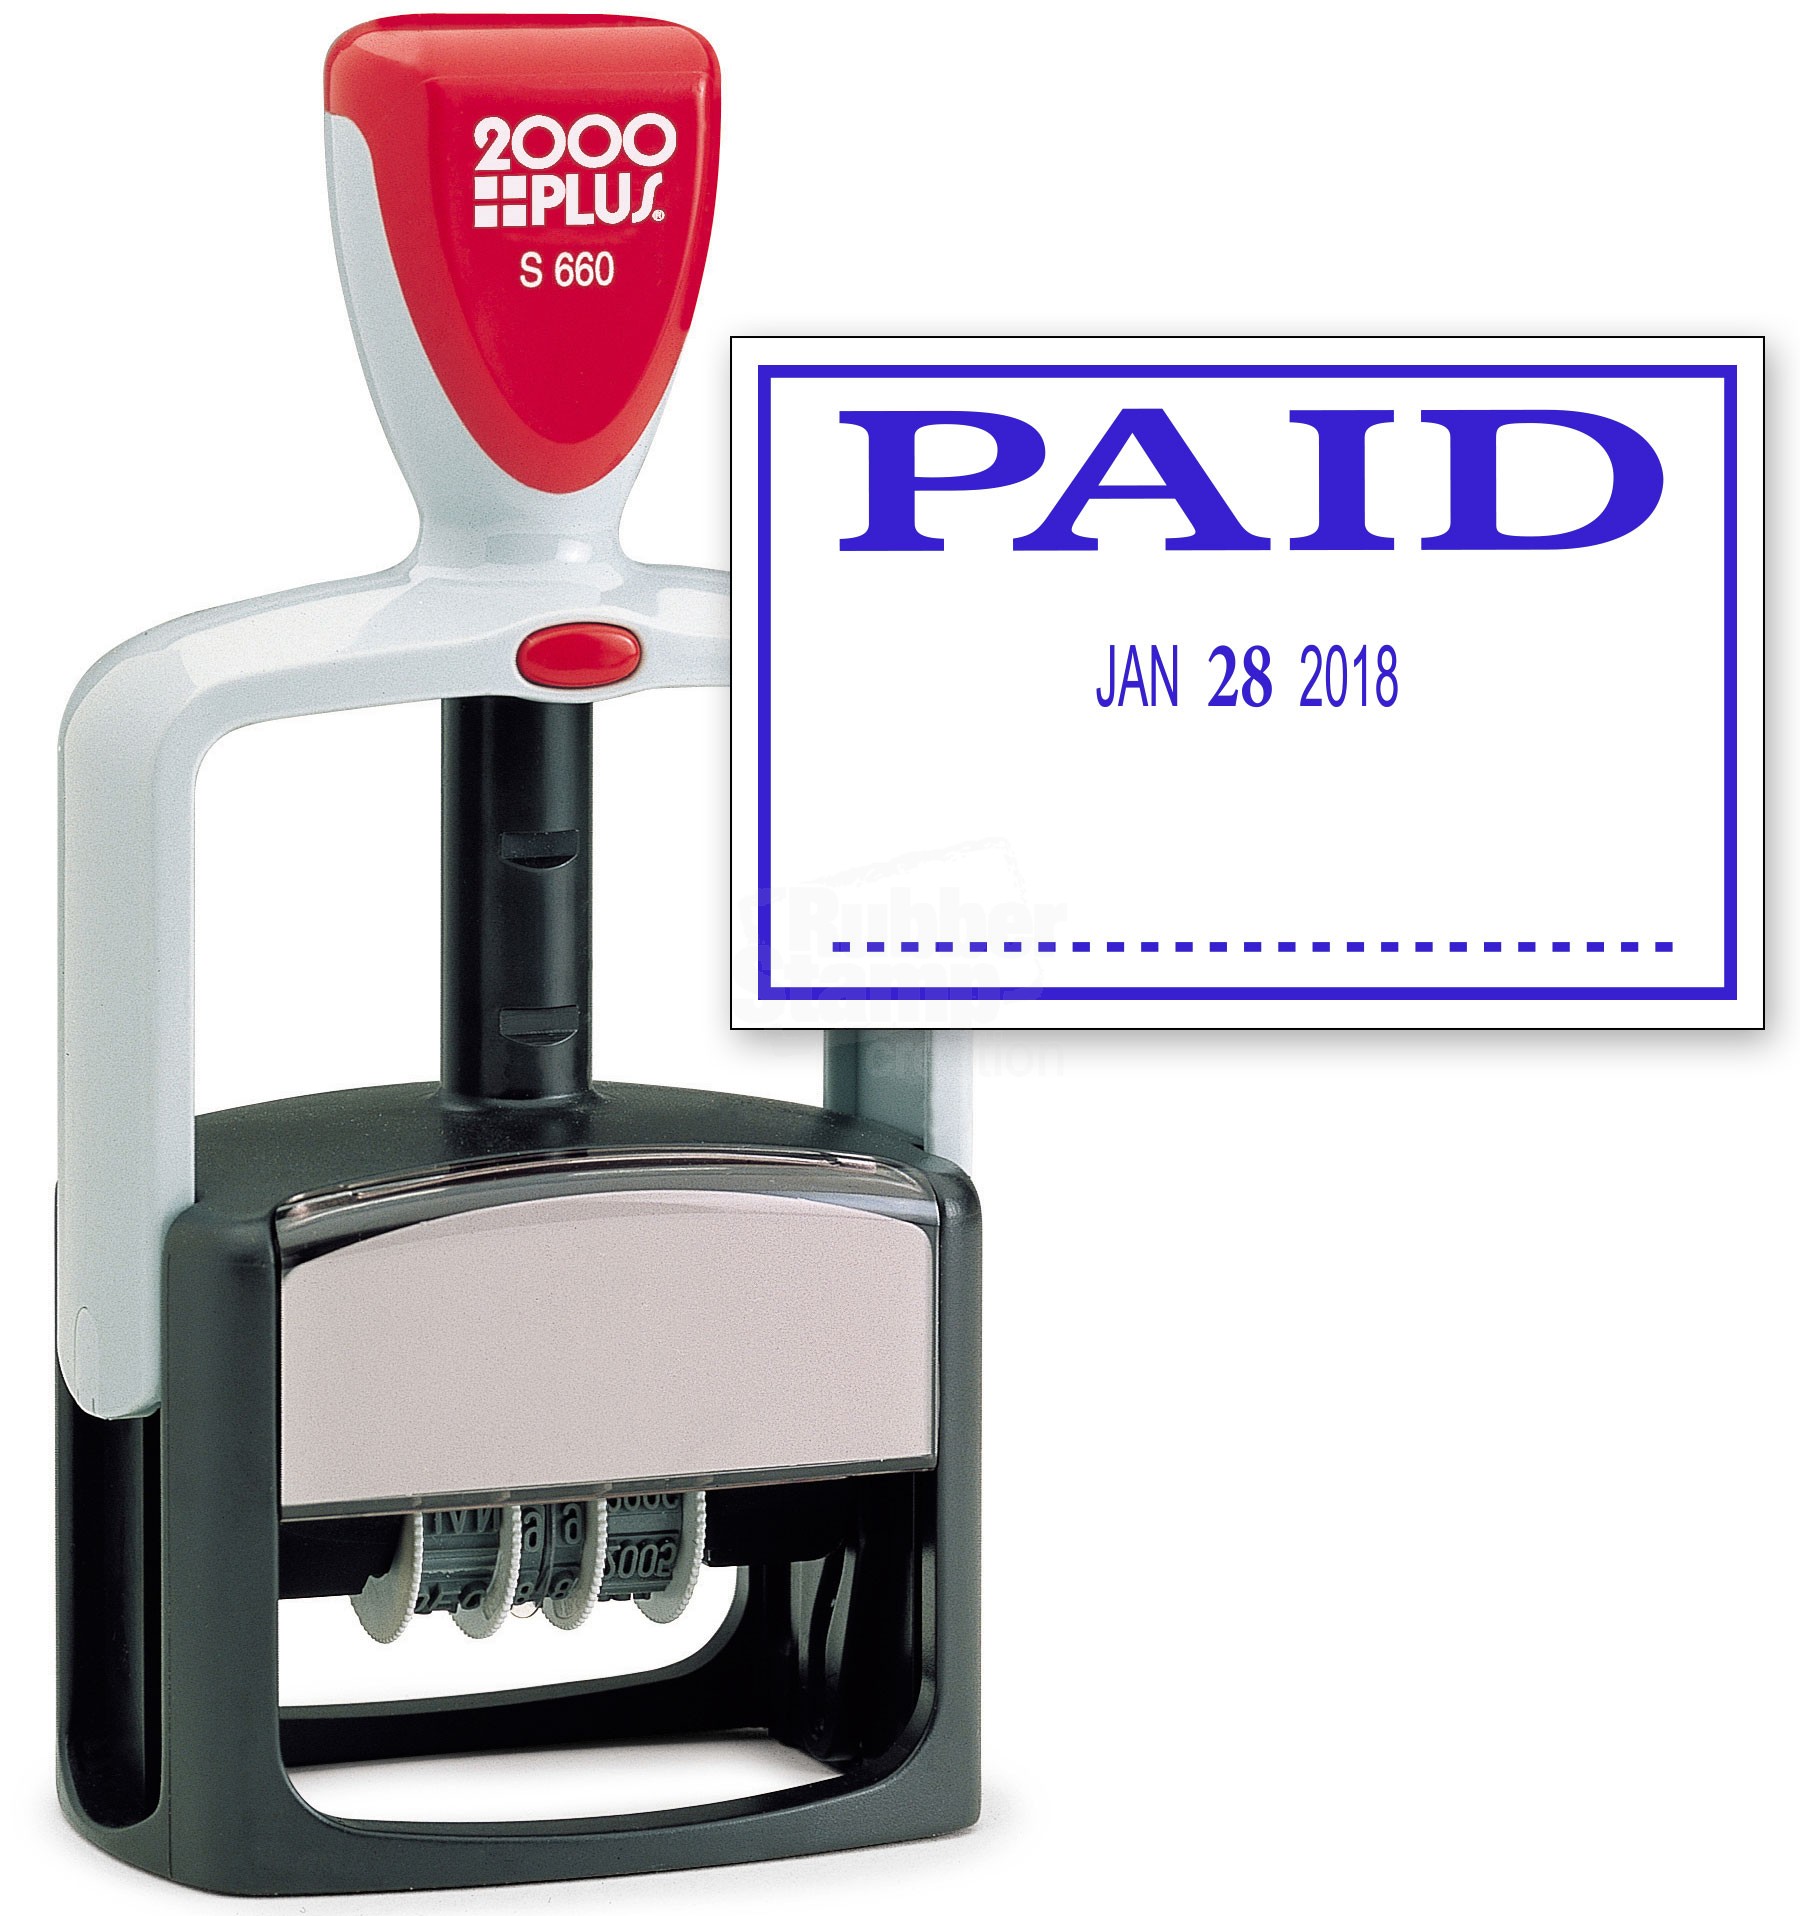 2000 Plus Heavy Duty Style 2 Color Date Stamp With Paid Self Inking